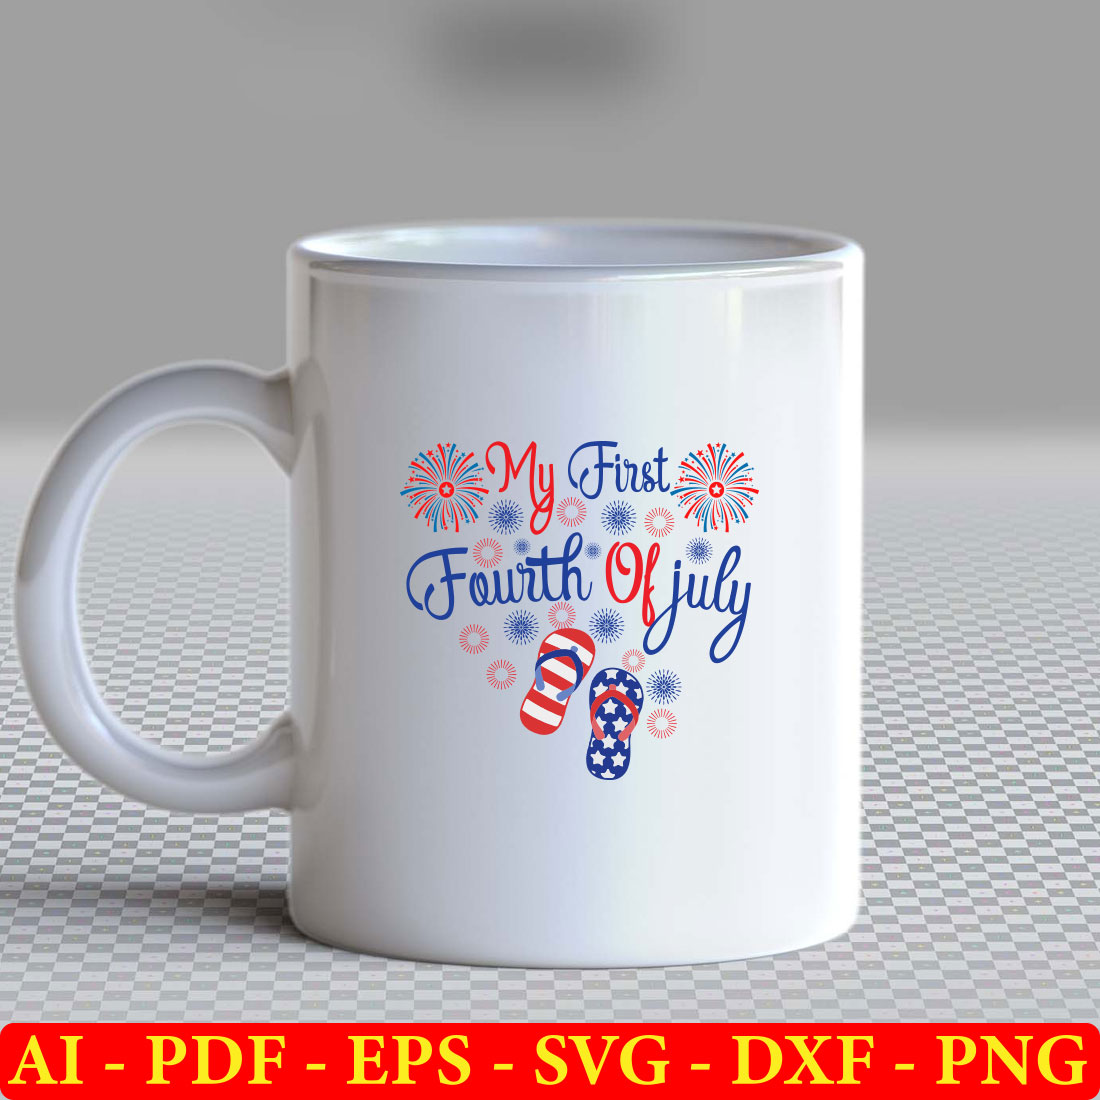 White coffee mug with the words my first fourth of july printed on it.